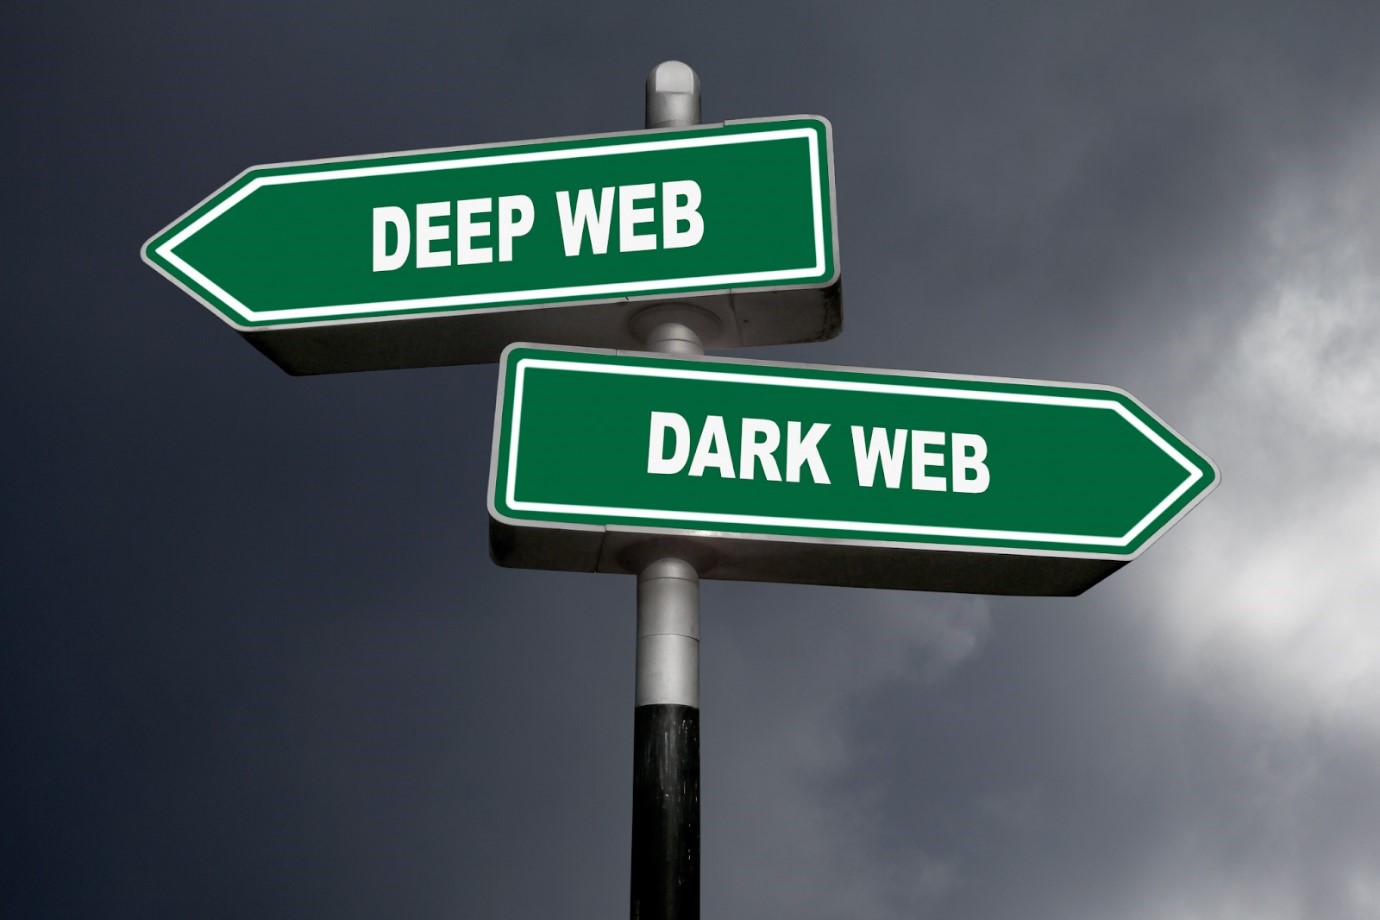 Signboard pointing in opposite directions towards the deep web and dark web.